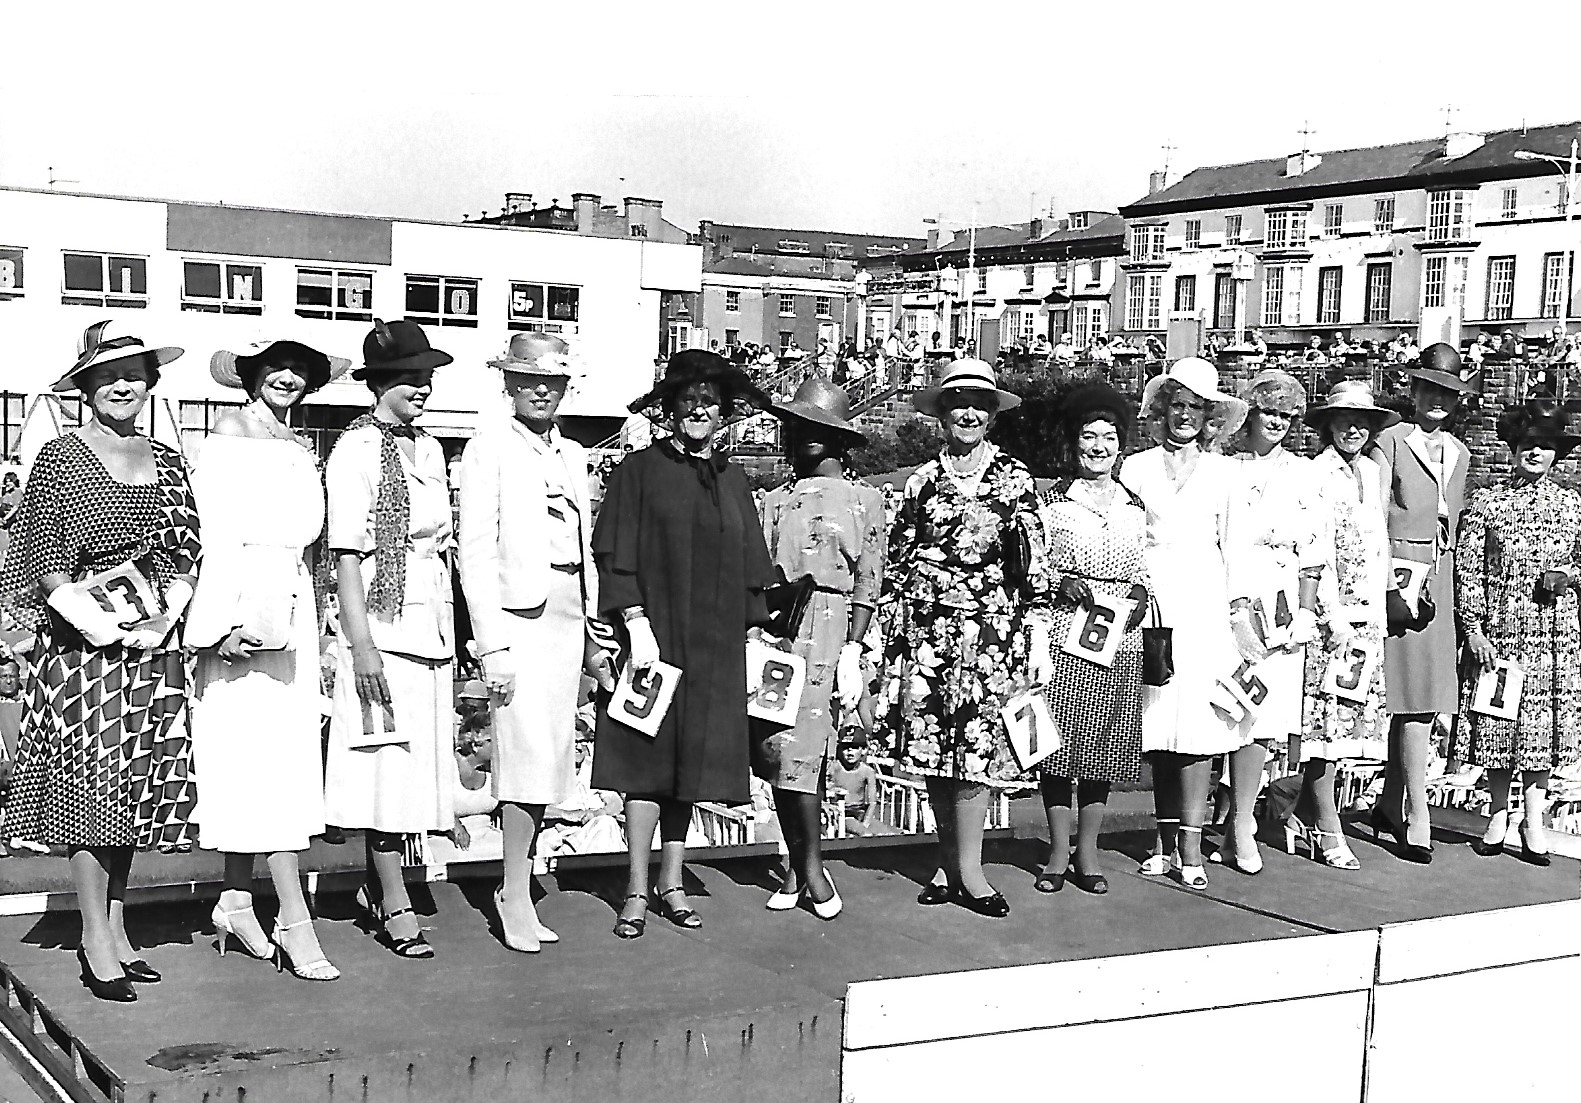 The Lady of Fashion Parade took place in the Floral Hall Gardens in Southport in September 1981